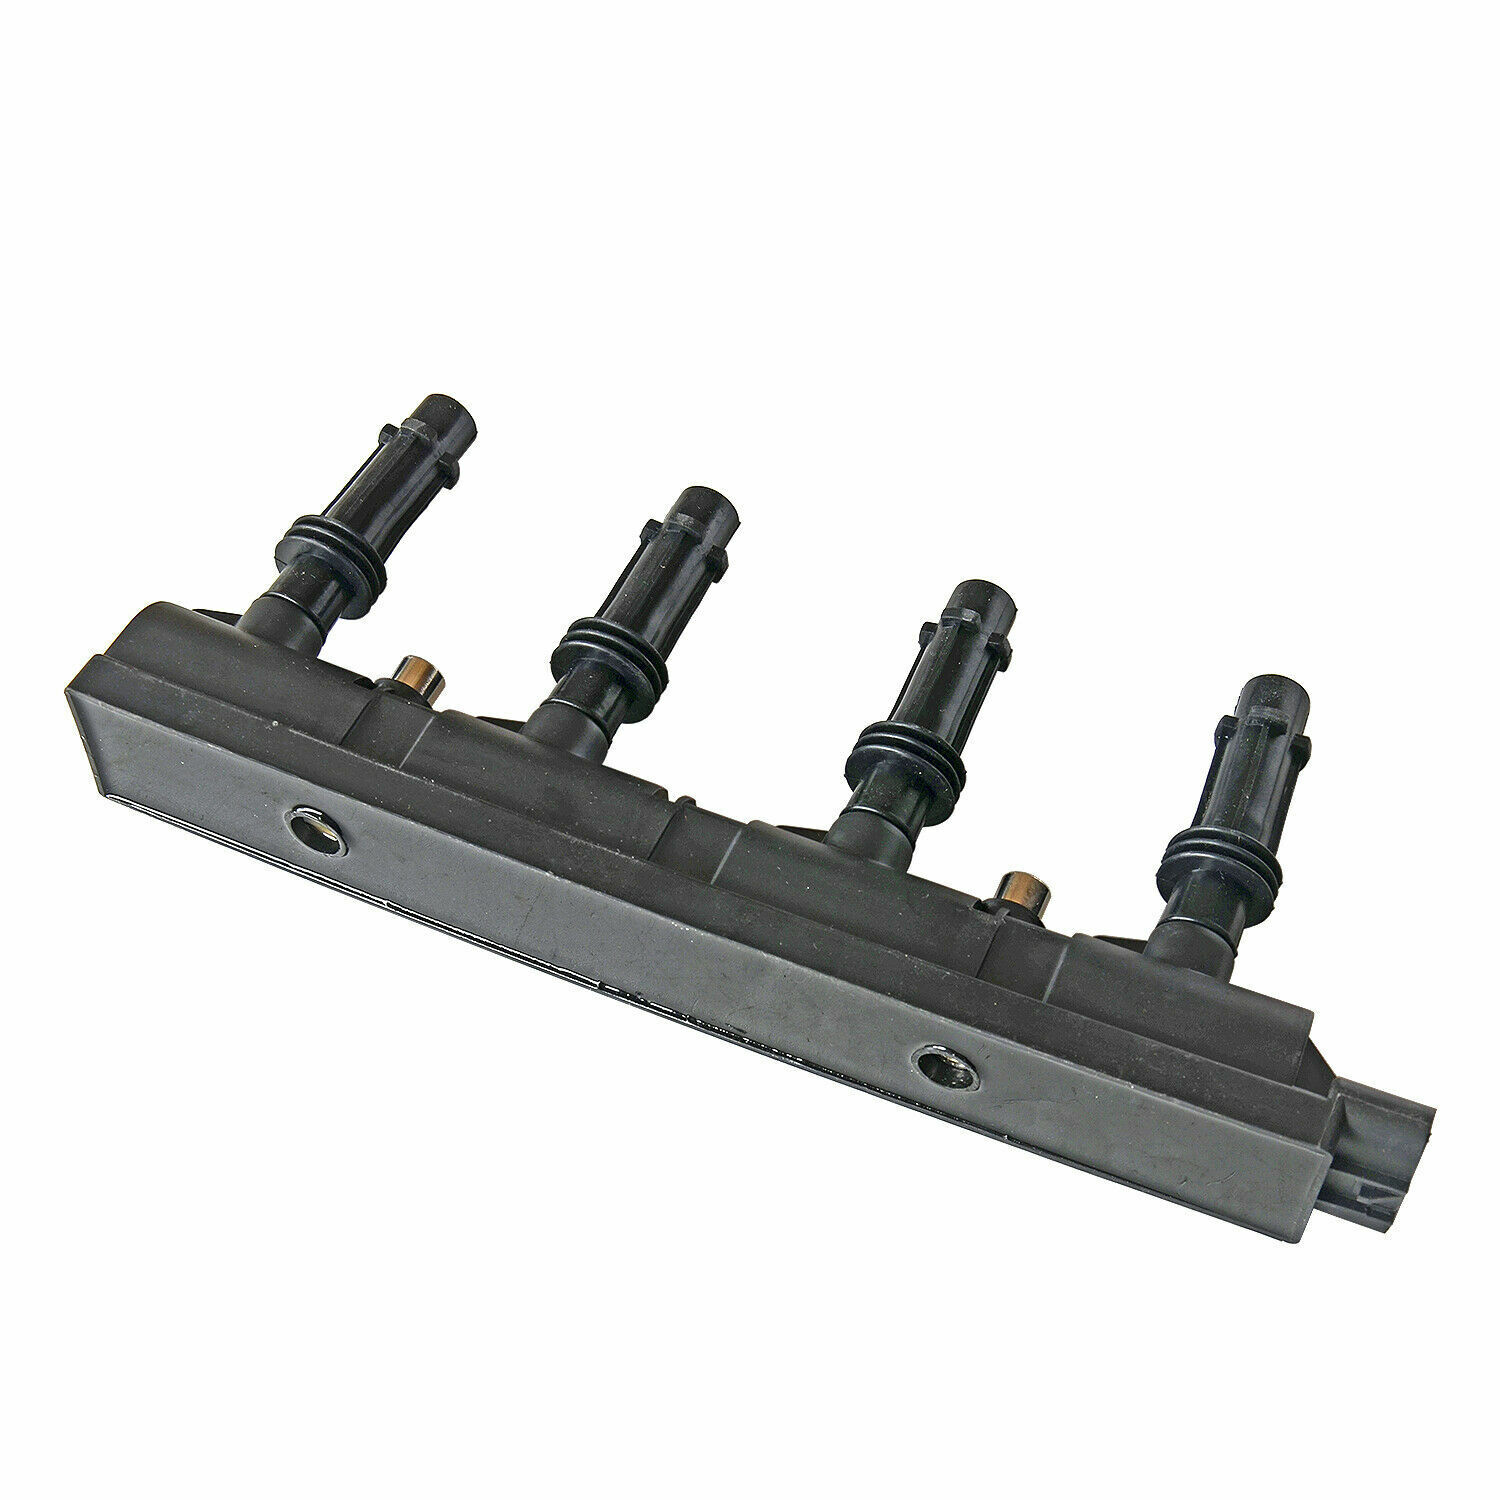 Ignition Coil Pack for Chevrolet Cruze Opel Astra 1.4L 1208092 1208096 1208093